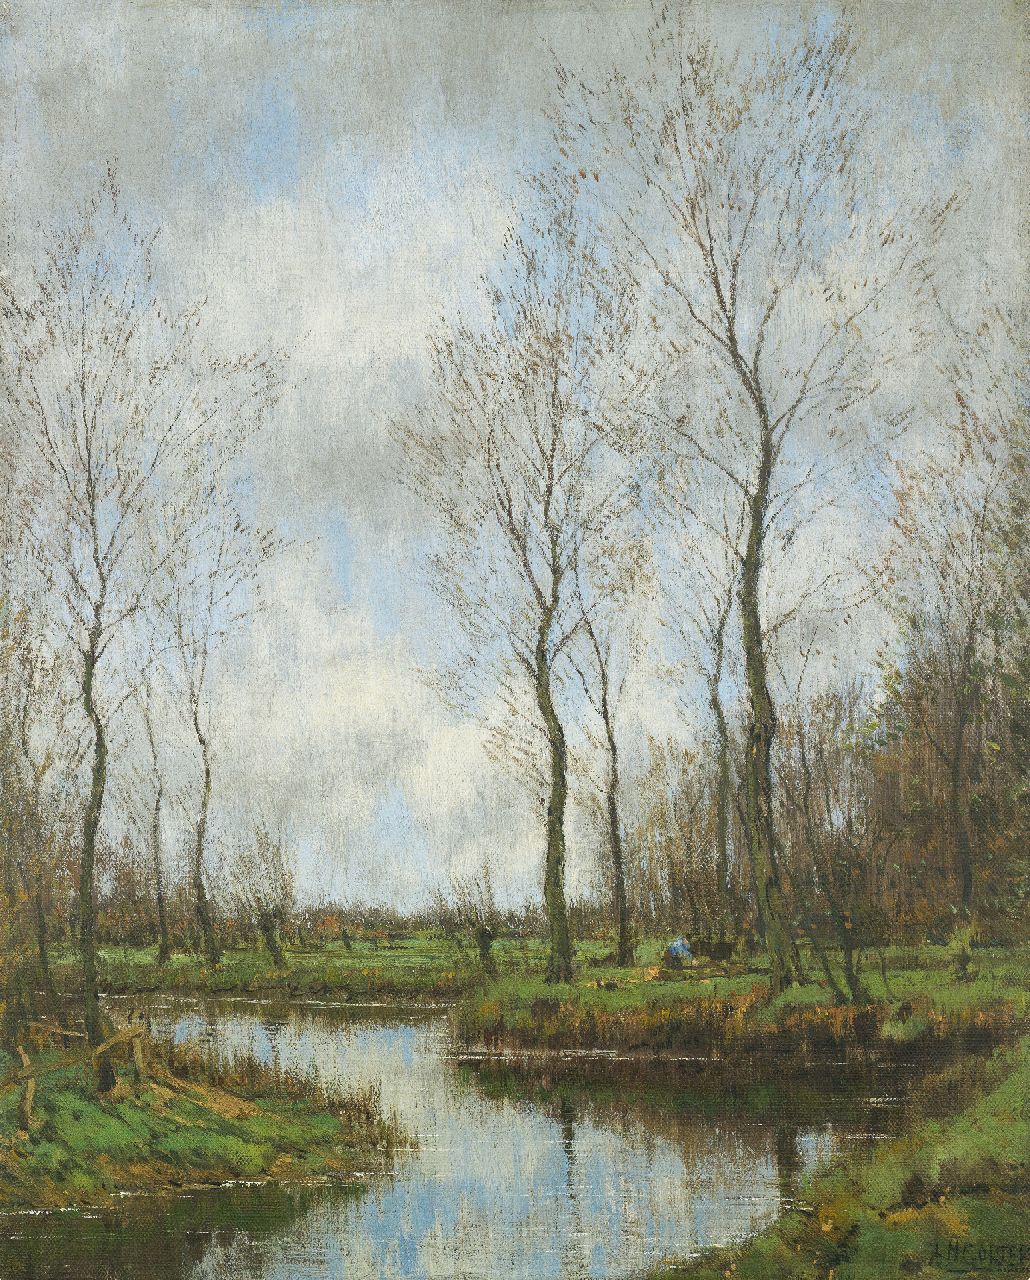 Gorter A.M.  | 'Arnold' Marc Gorter | Paintings offered for sale | Woodworker near the Vordense Beek, oil on canvas 50.5 x 40.4 cm, signed l.r.